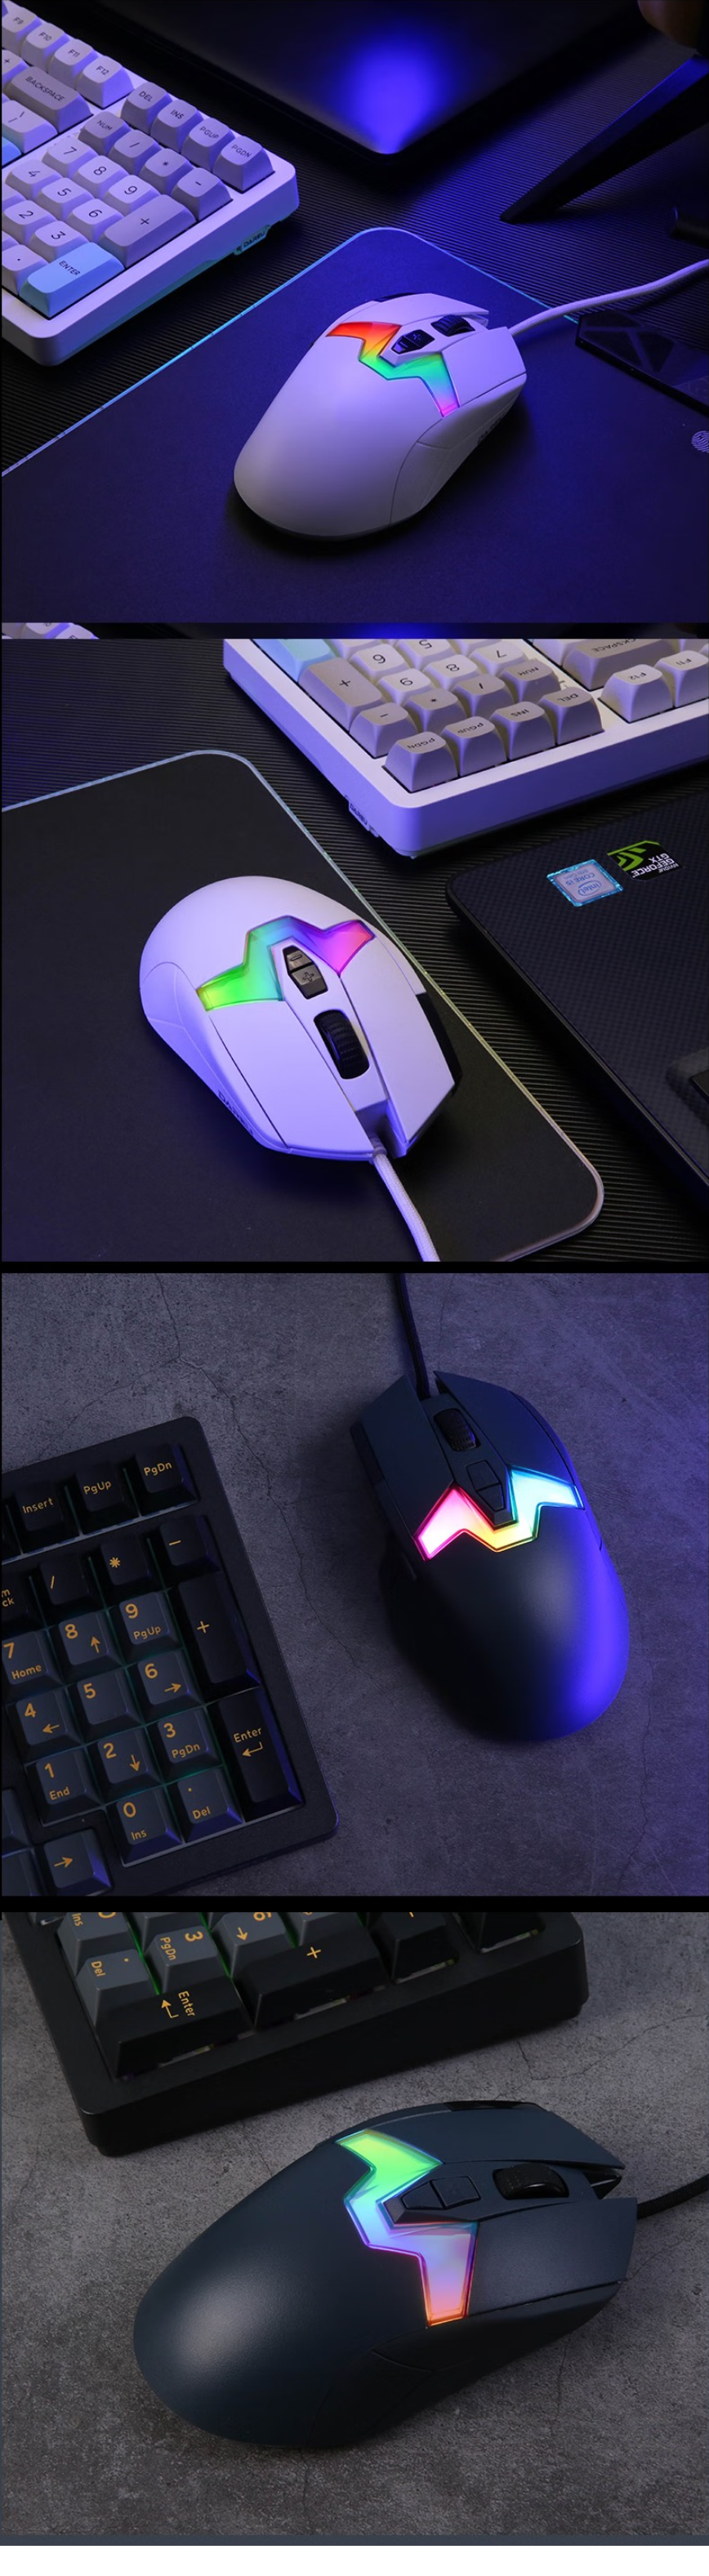 DAREU A980 Wired Mouse